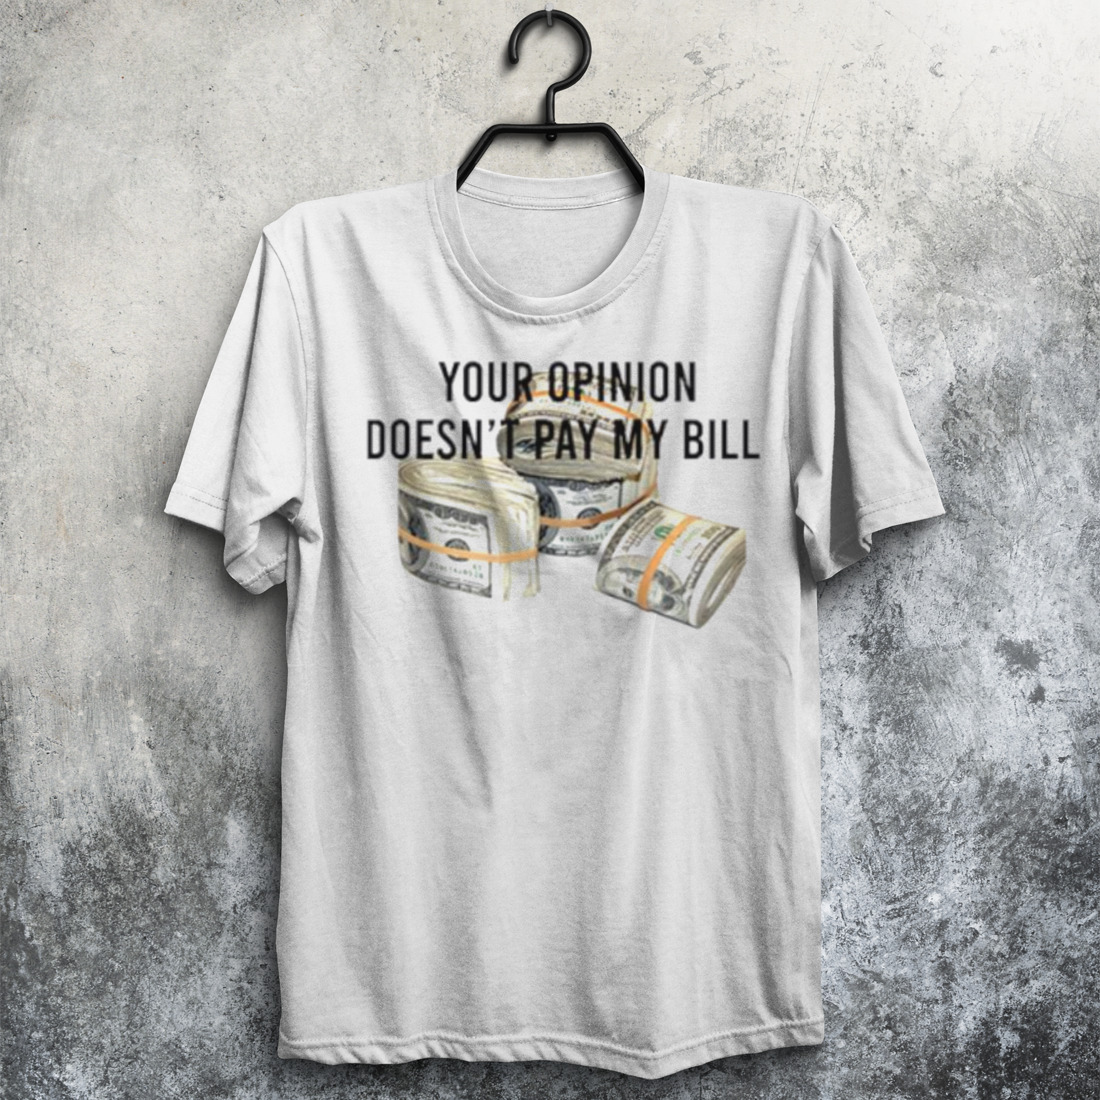 Your opinion doesn’t pay my bill shirt